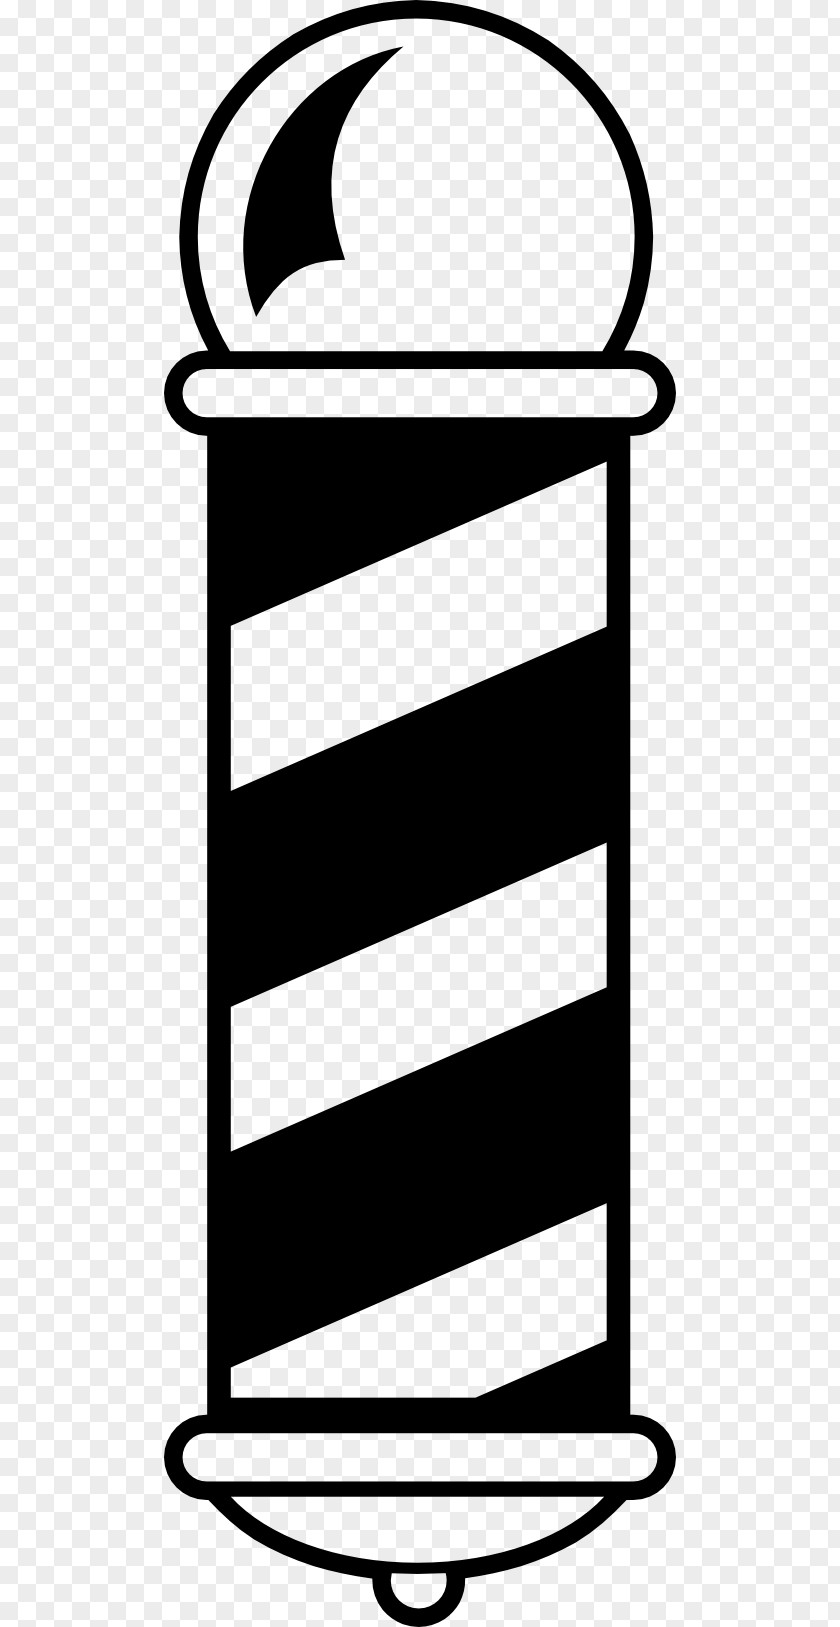 Barbershop Barber's Pole Hairstyle Clip Art PNG